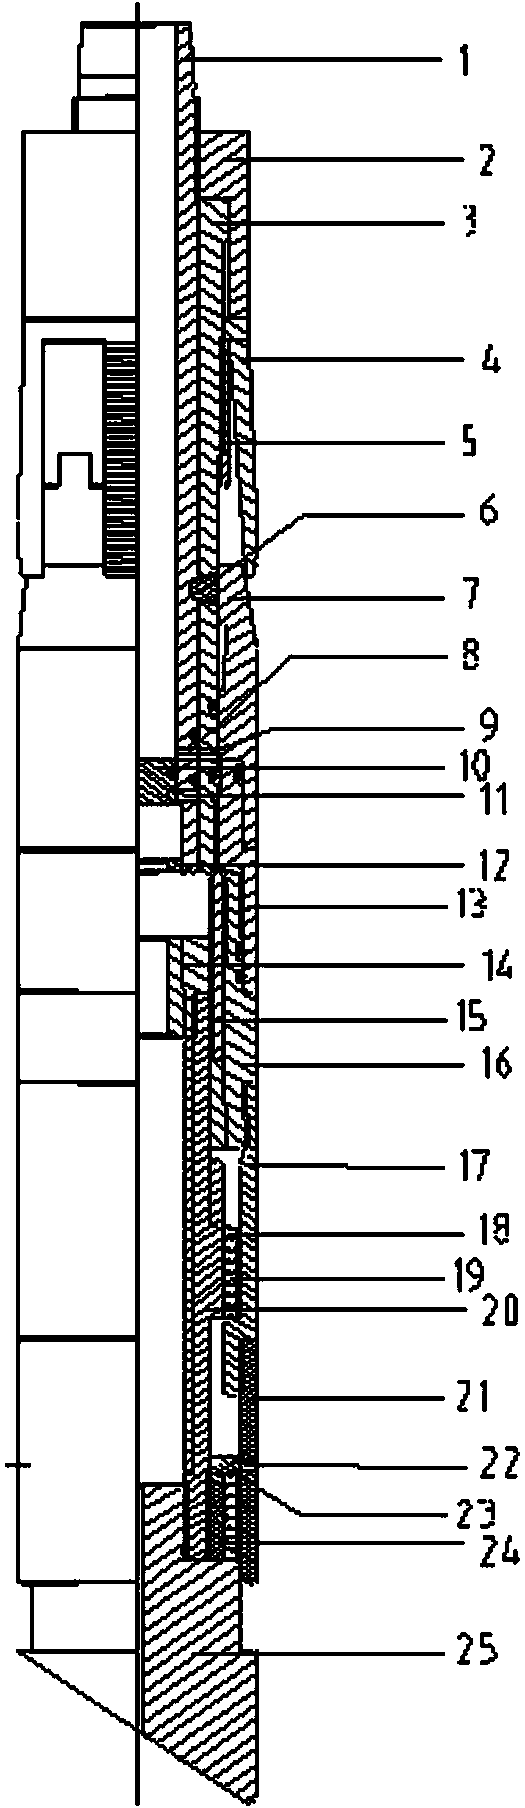 Centralizing string and restoring string for horizontal well casing pipe dislocation and restoring process of centralizing string and restoring string